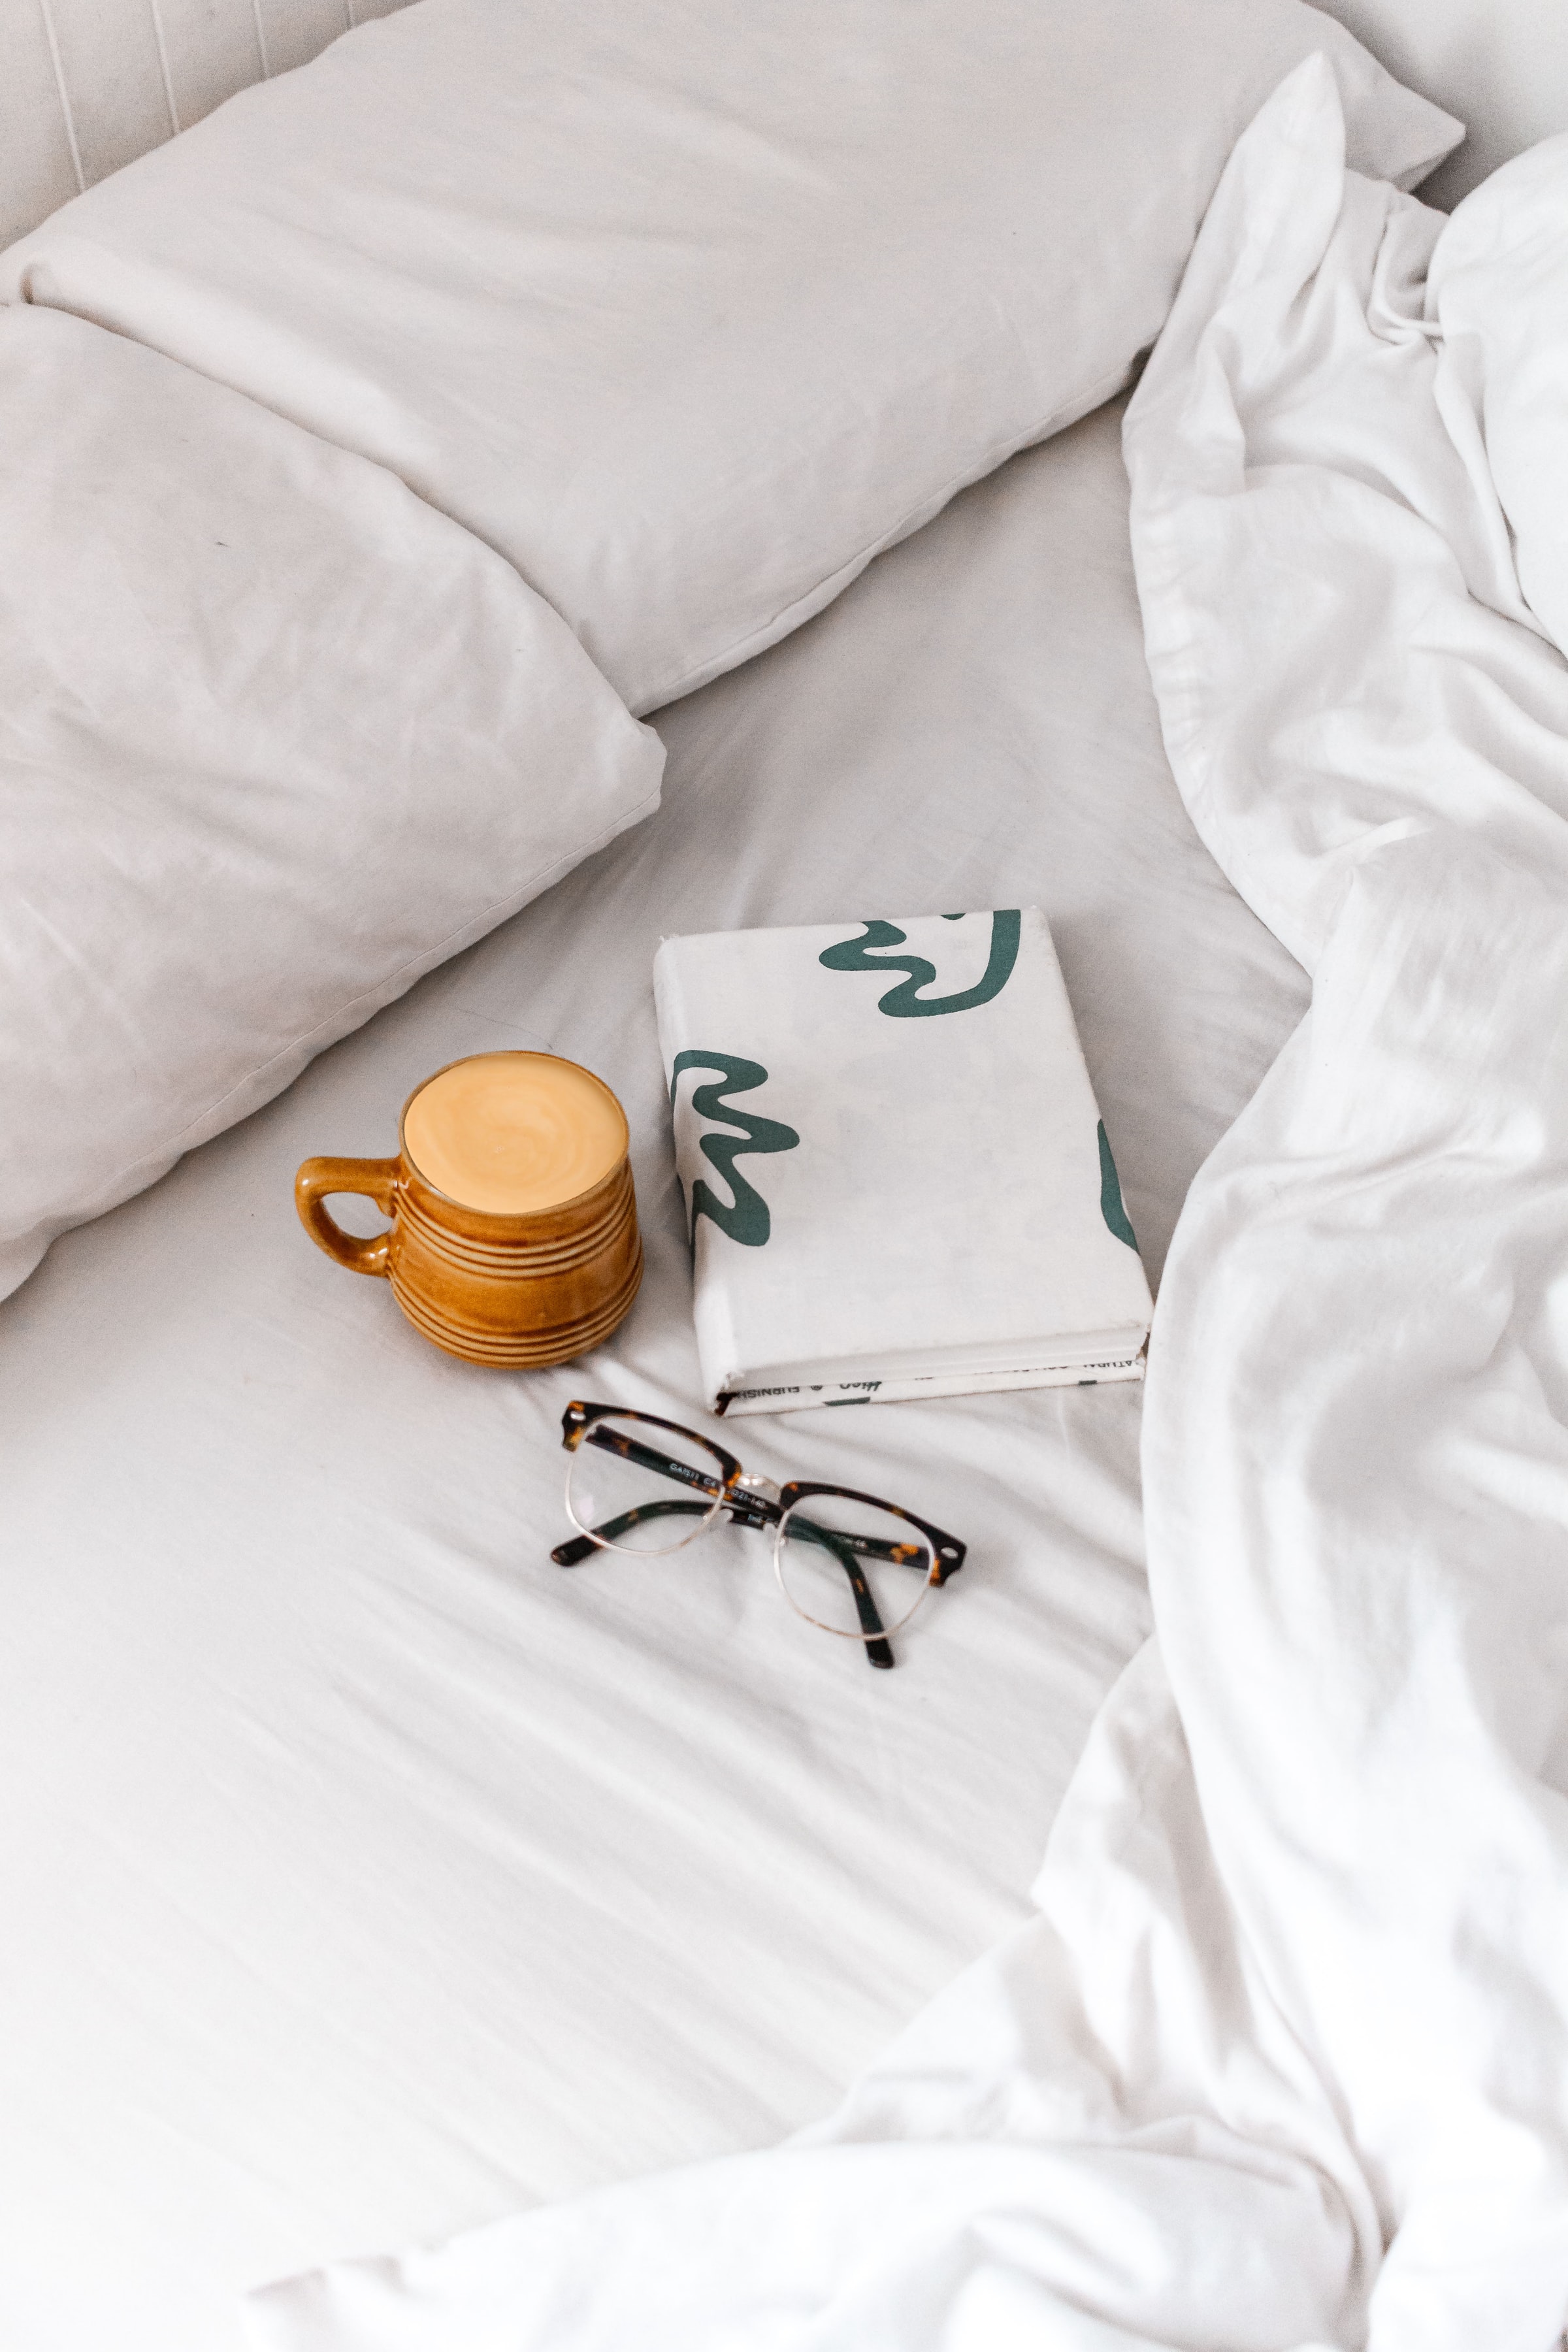 bed, coffee, miscellanea, miscellaneous, cup, book, glasses, spectacles cellphone